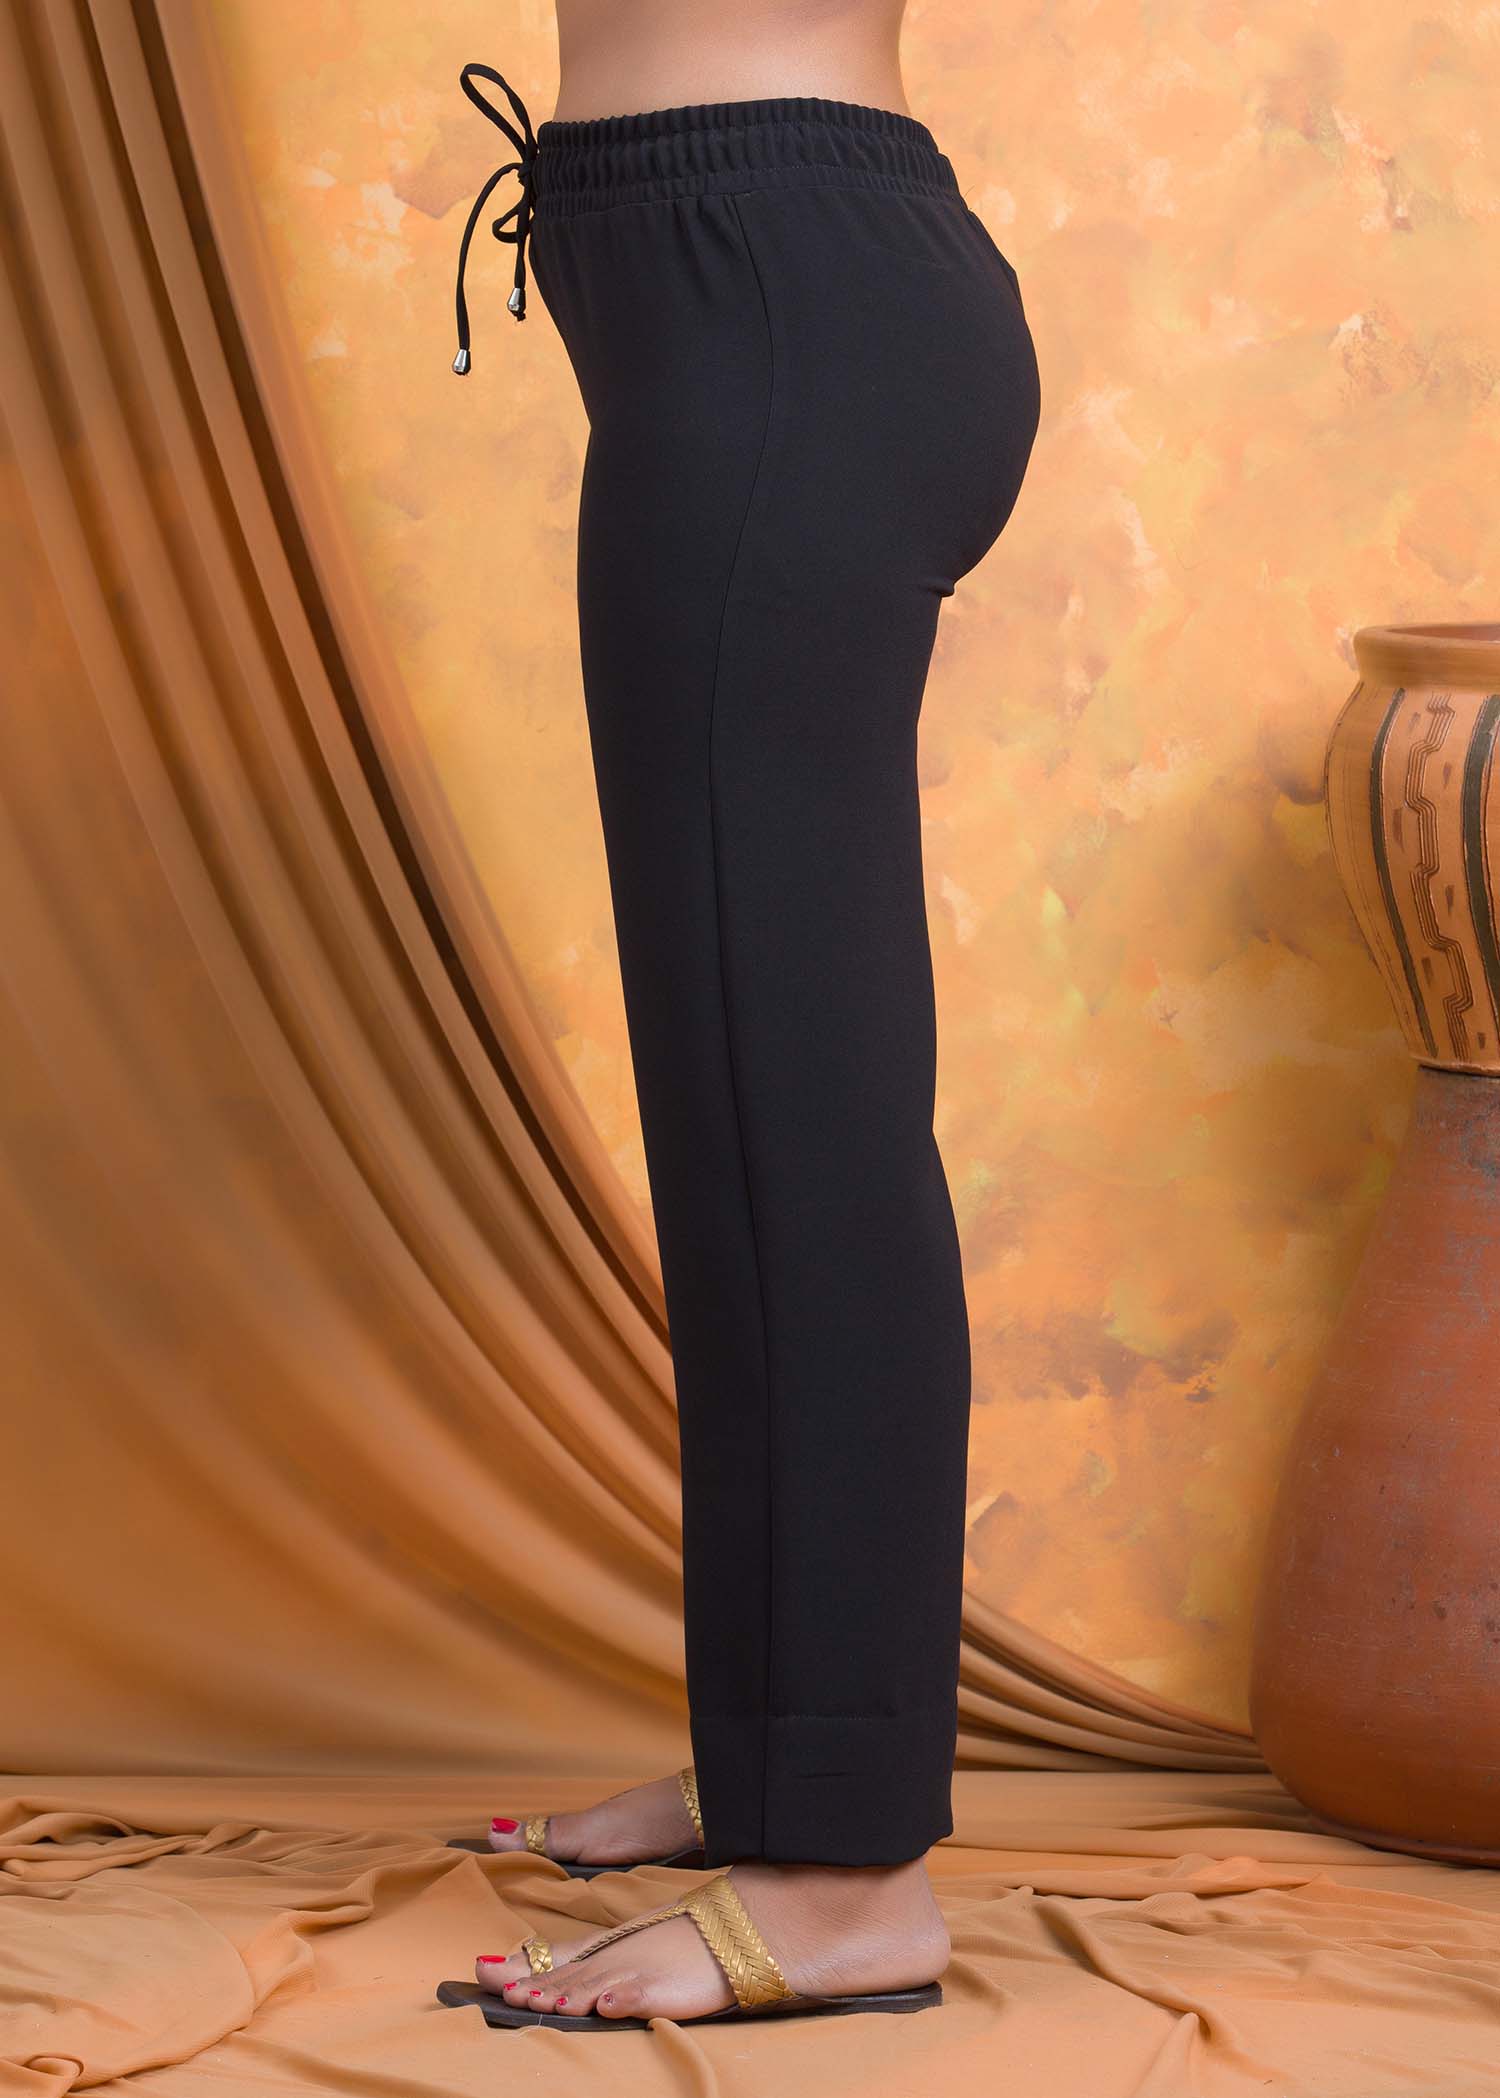 Elasticated waist pant with draw cord